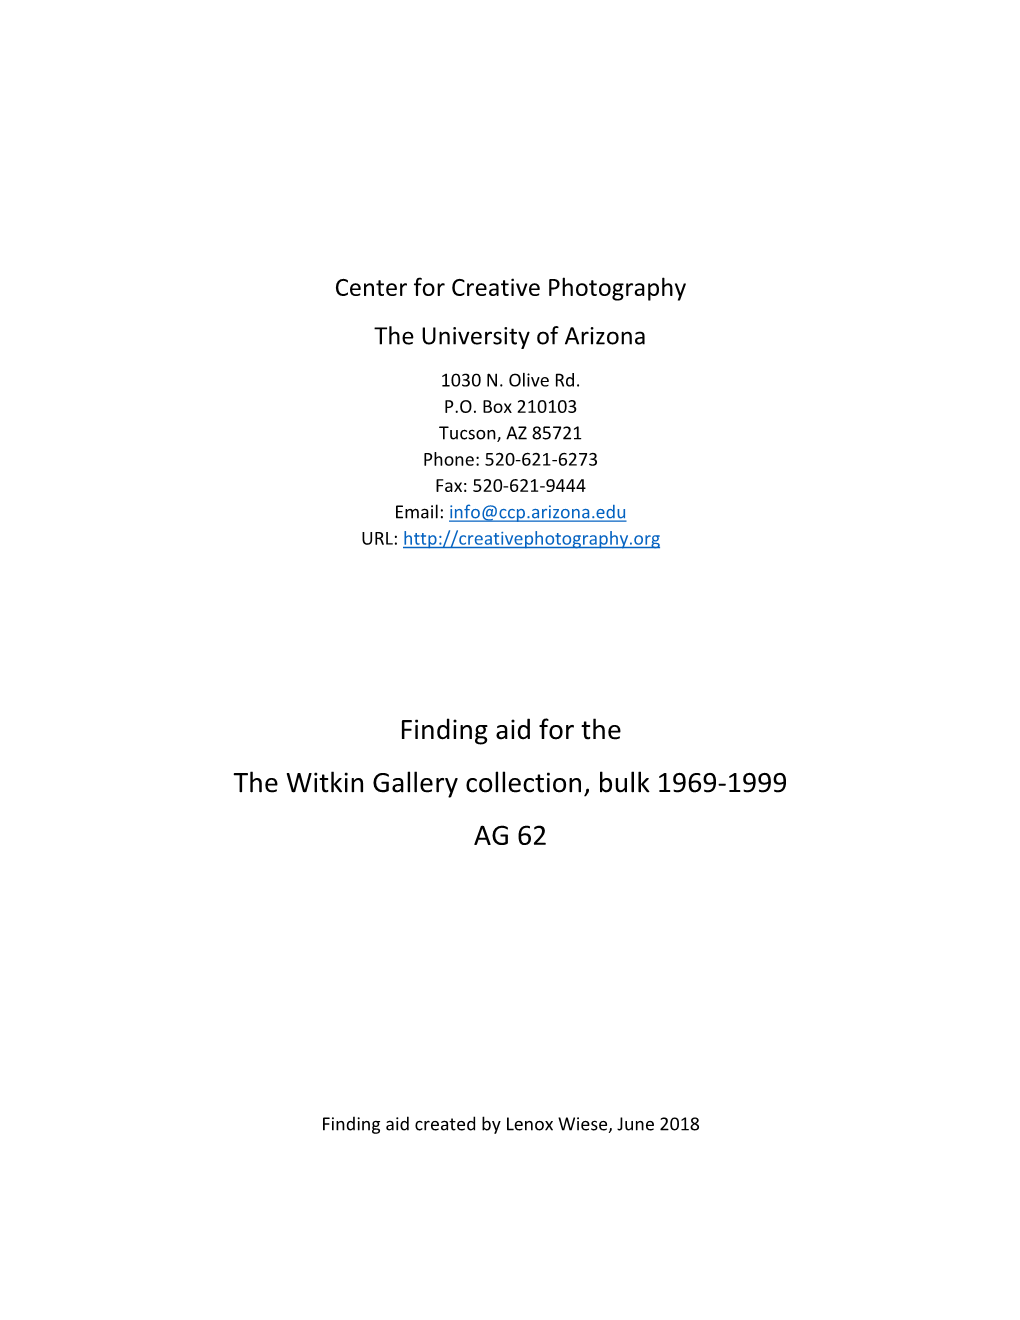 Finding Aid for the Witkin Gallery Collection